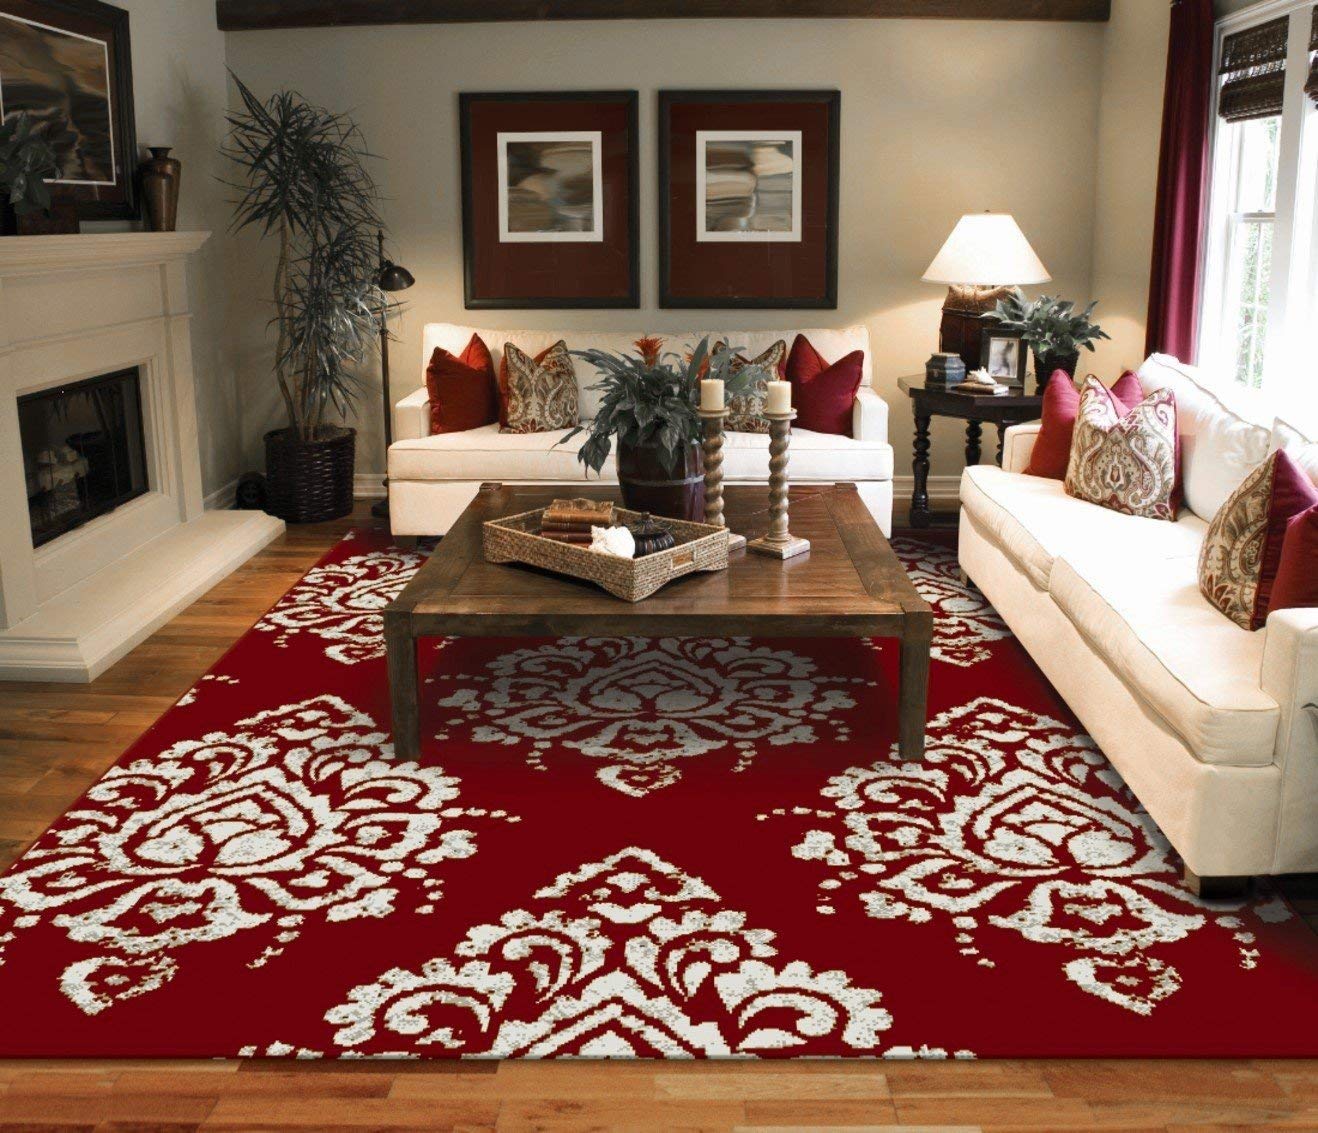 Use of red rugs